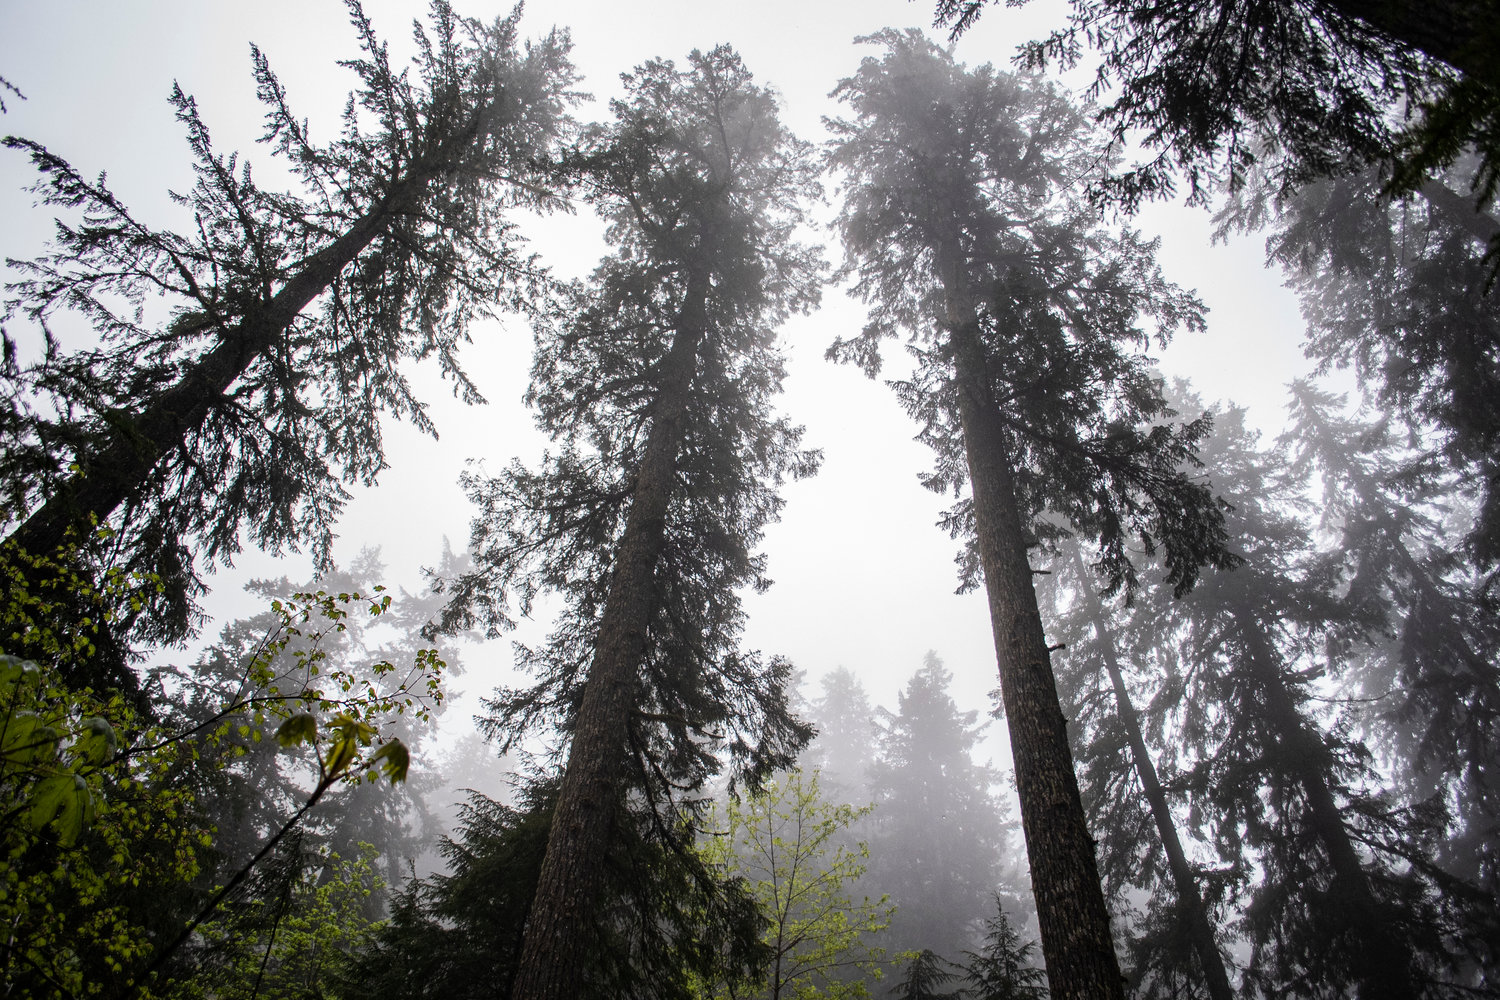 Fog rises through the trees near the Ohanapecosh Campground in Mount Rainier National Park on Sunday afternoon.